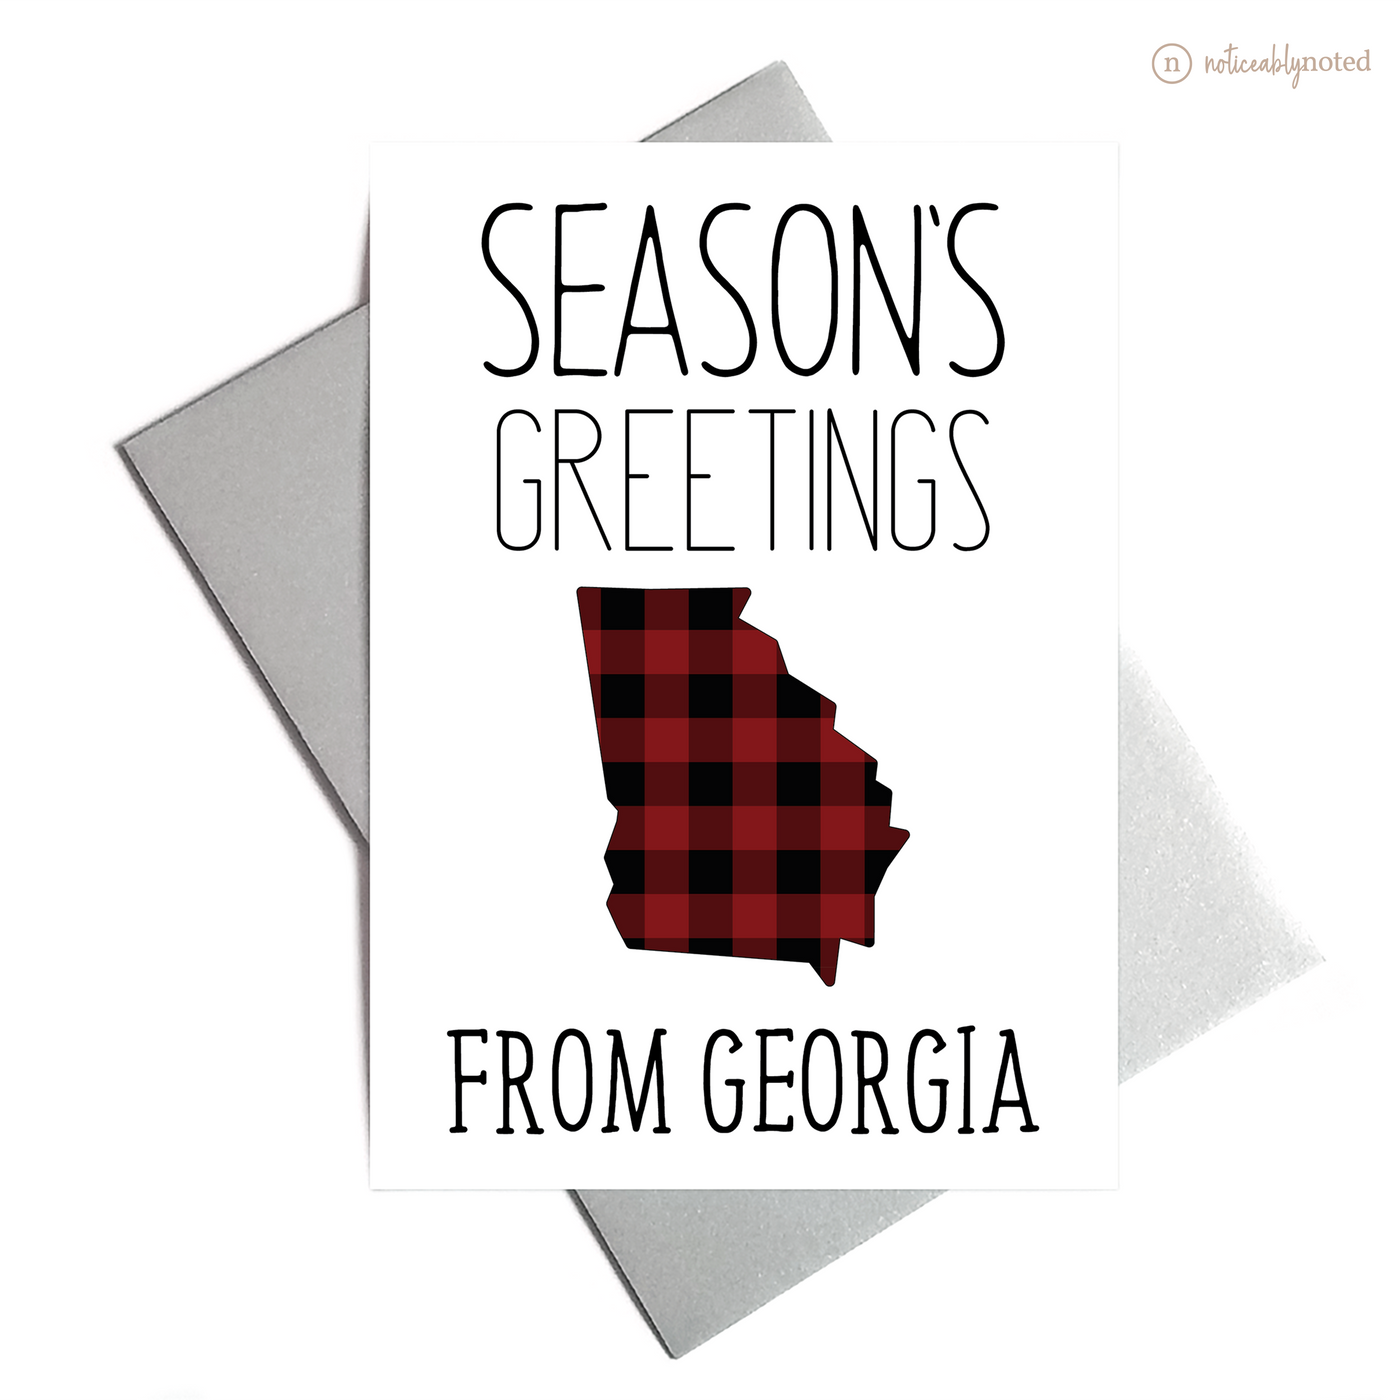 Georgia Christmas Cards | Noticeably Noted